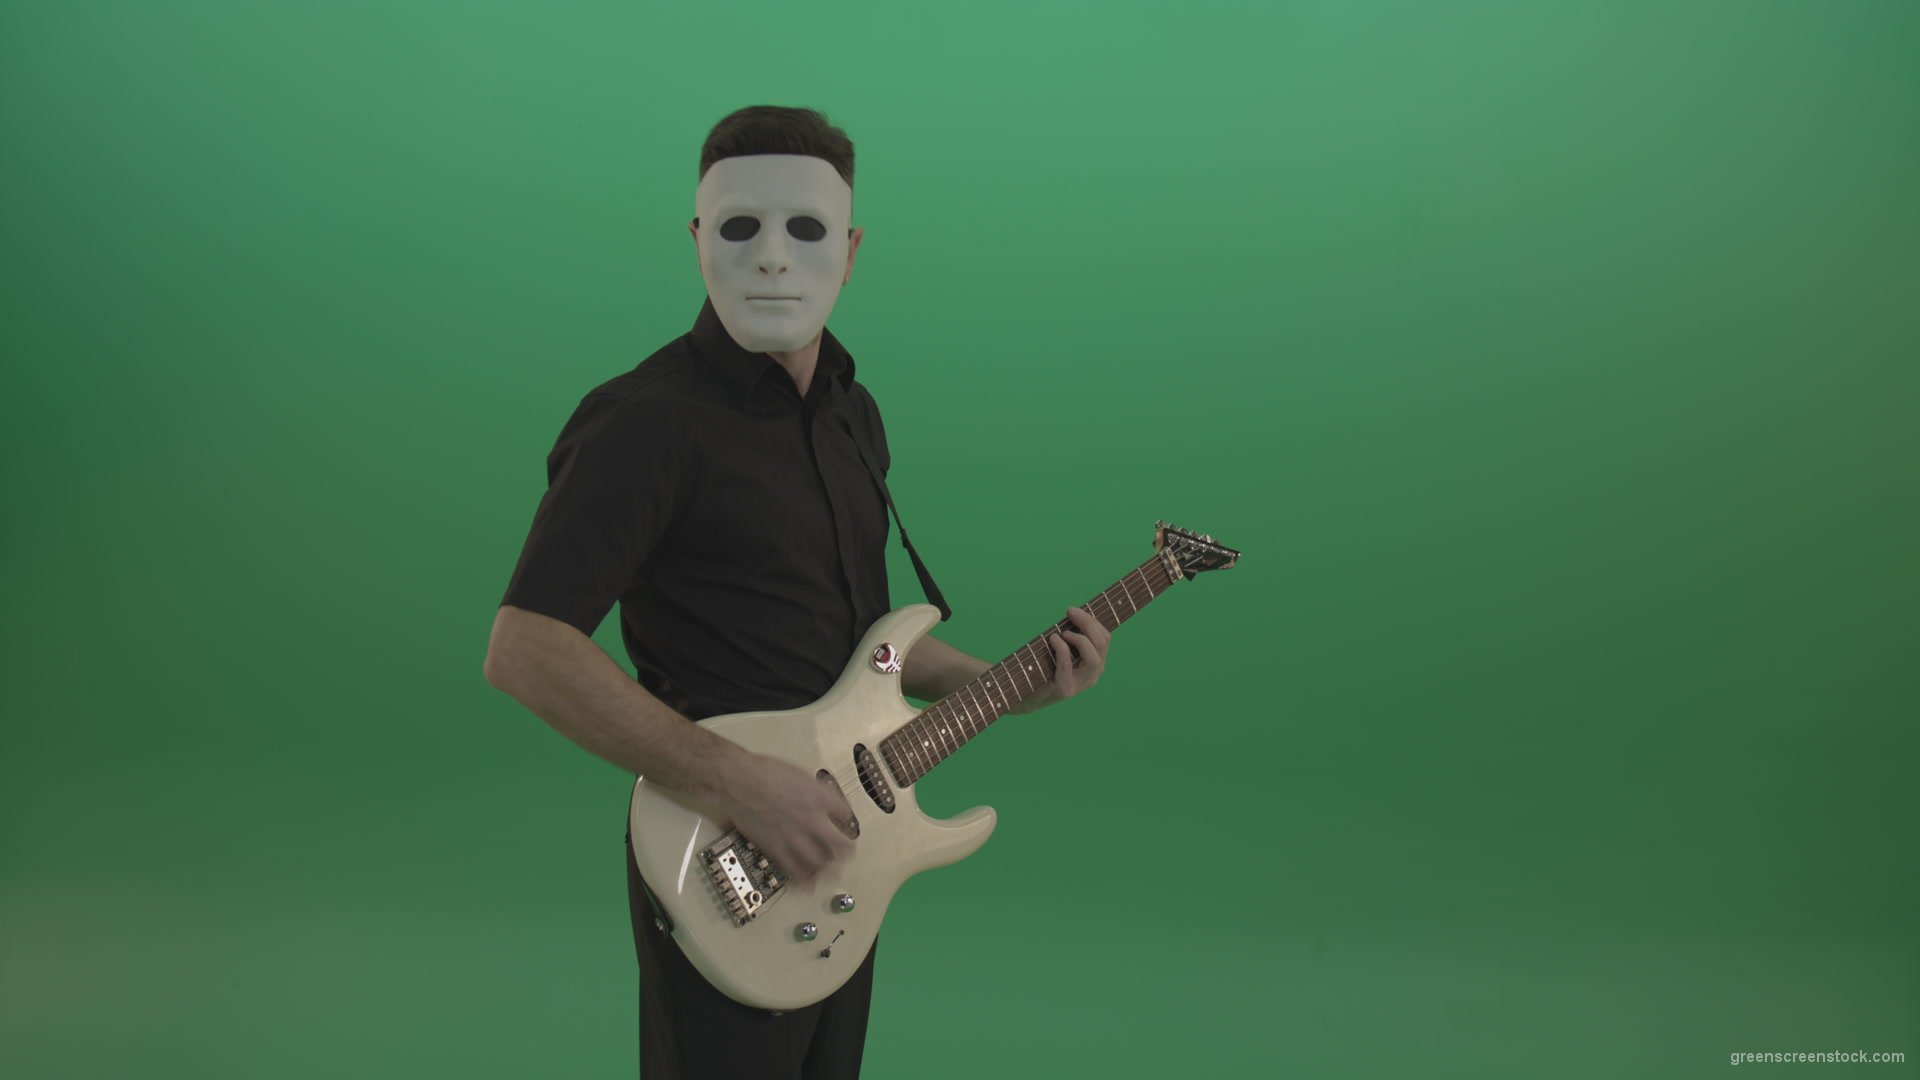 Rock-man-in-white-mask-and-black-wear-playing-guitar-isolated-on-green-screen-in-side-view_006 Green Screen Stock